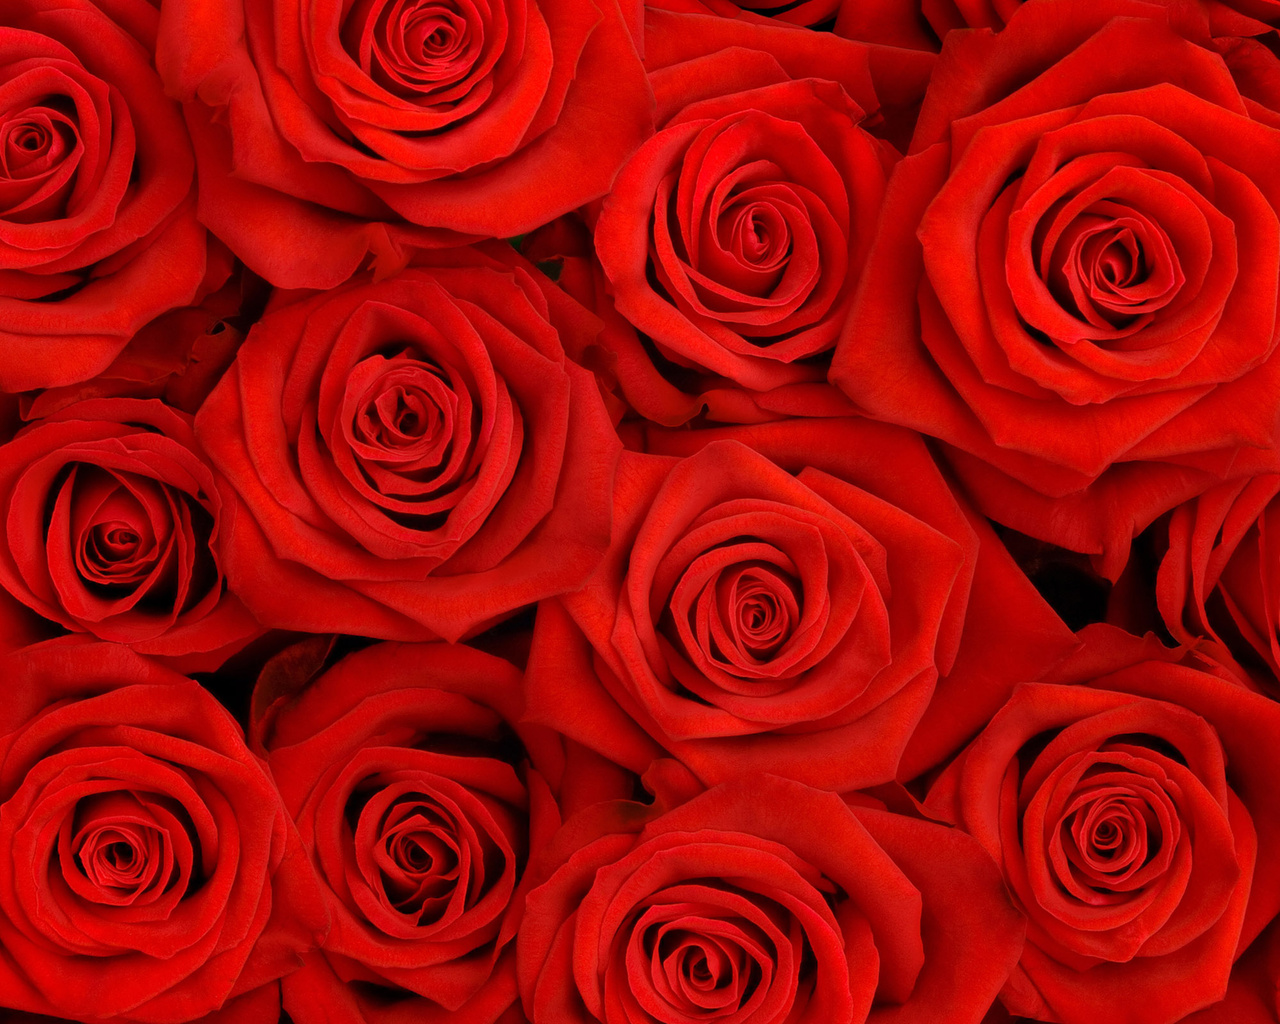 Red Flower Backgrounds wallpaper | 1280x1024 | #23491